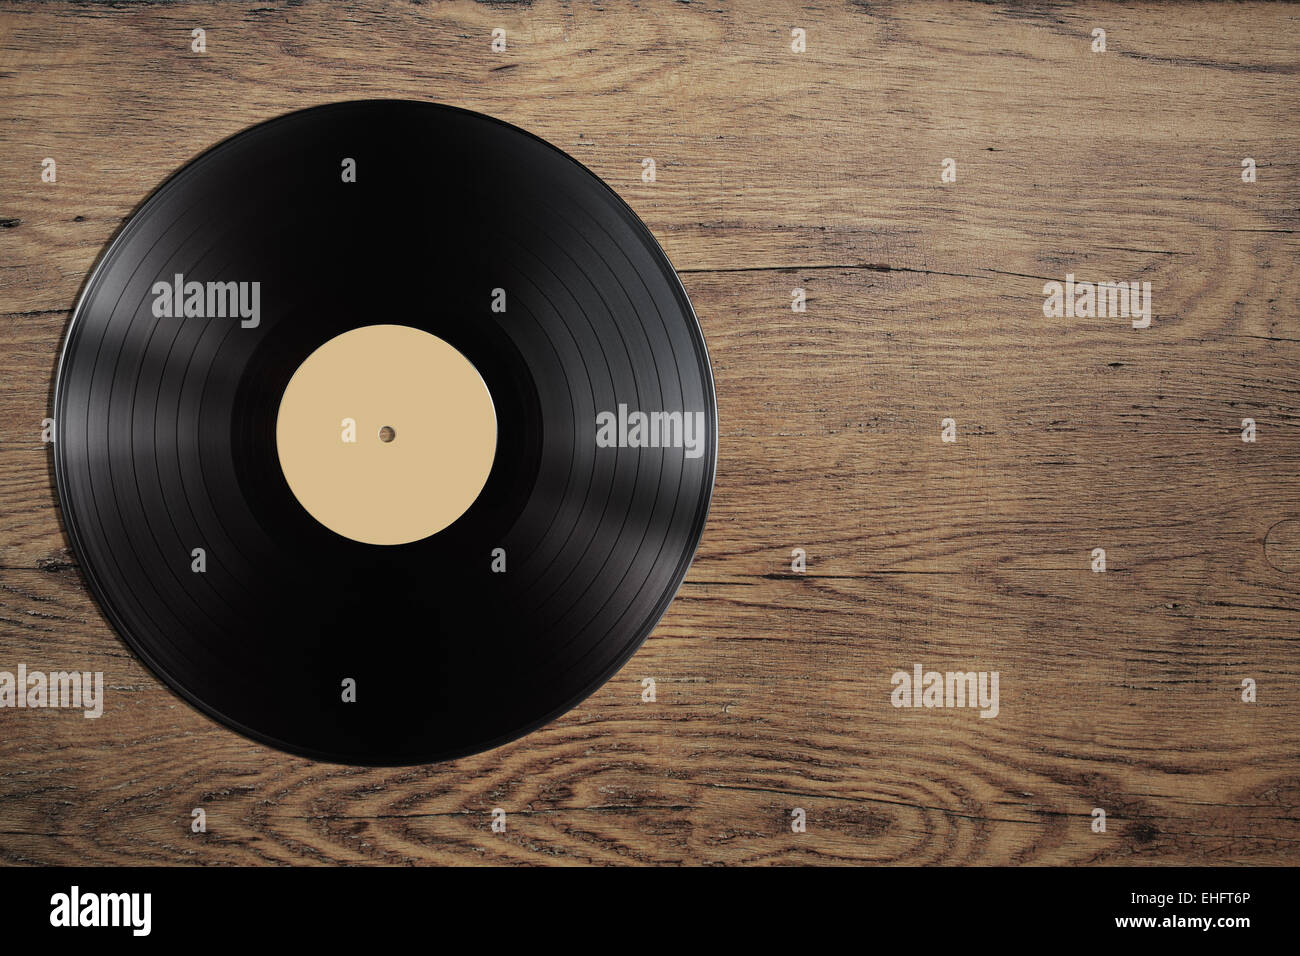 vynil record disc on wooden table Stock Photo